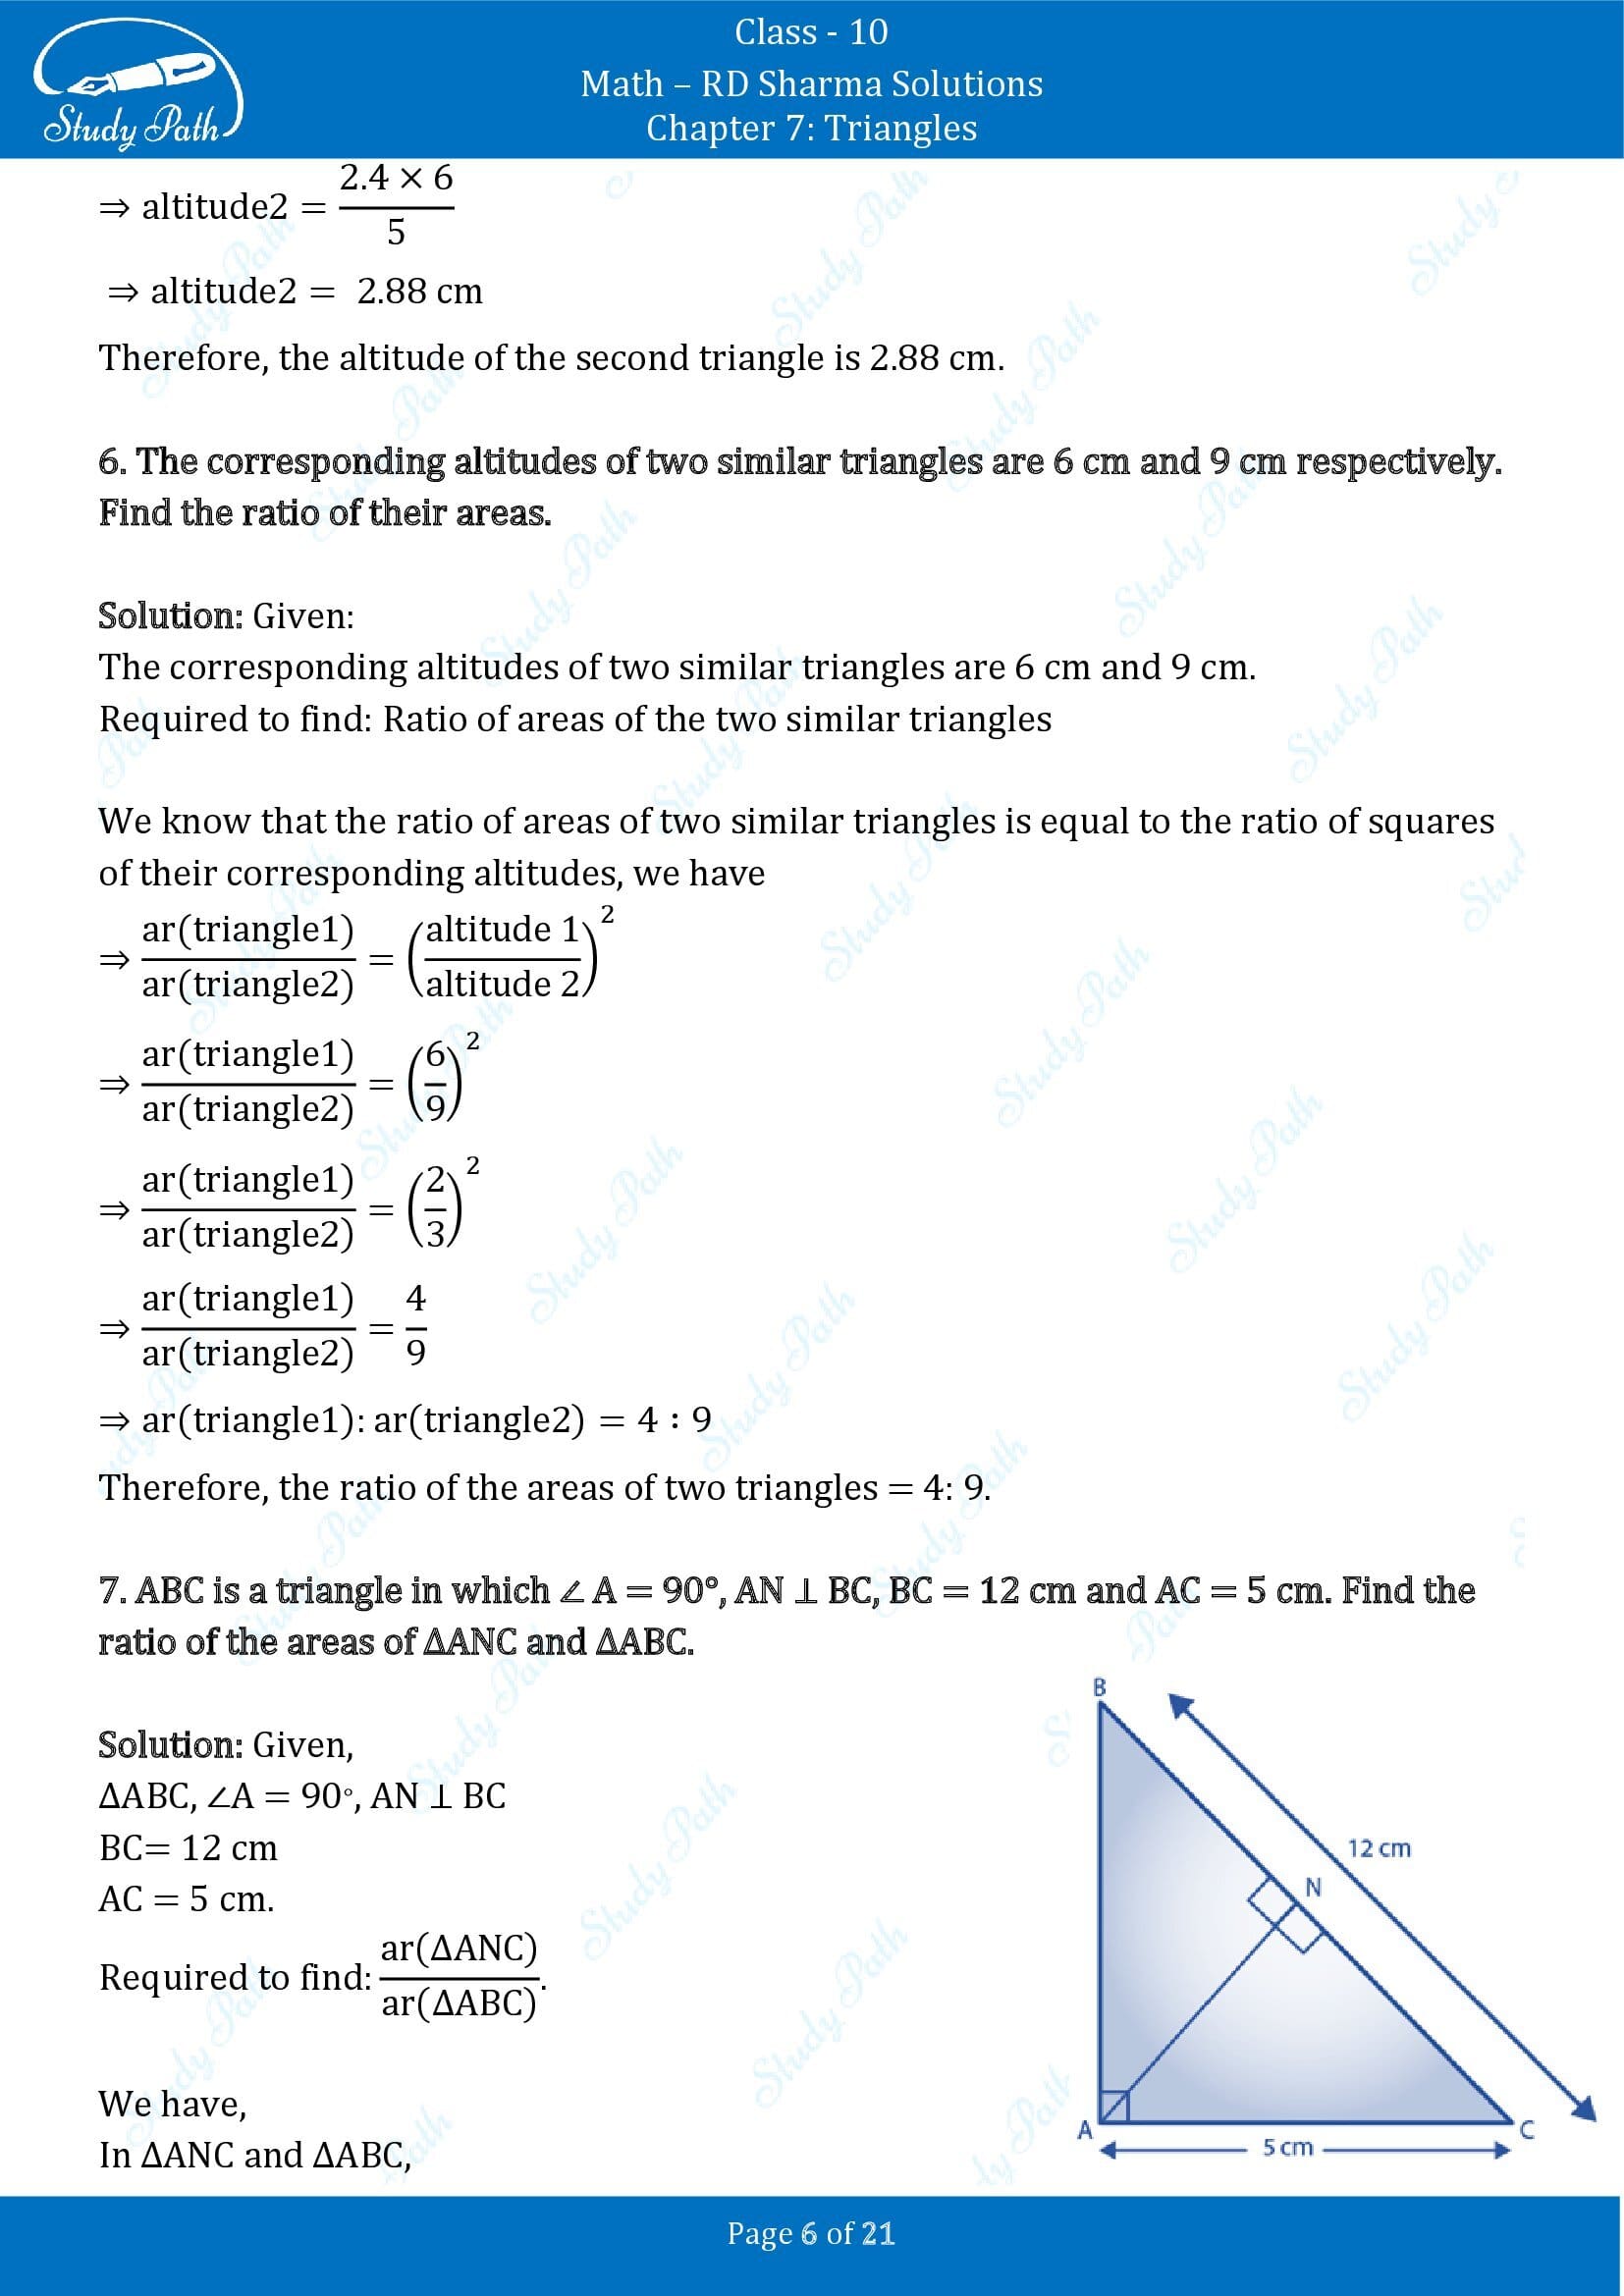 RD Sharma Solutions Class 10 Chapter 7 Triangles Exercise 7.6 00006